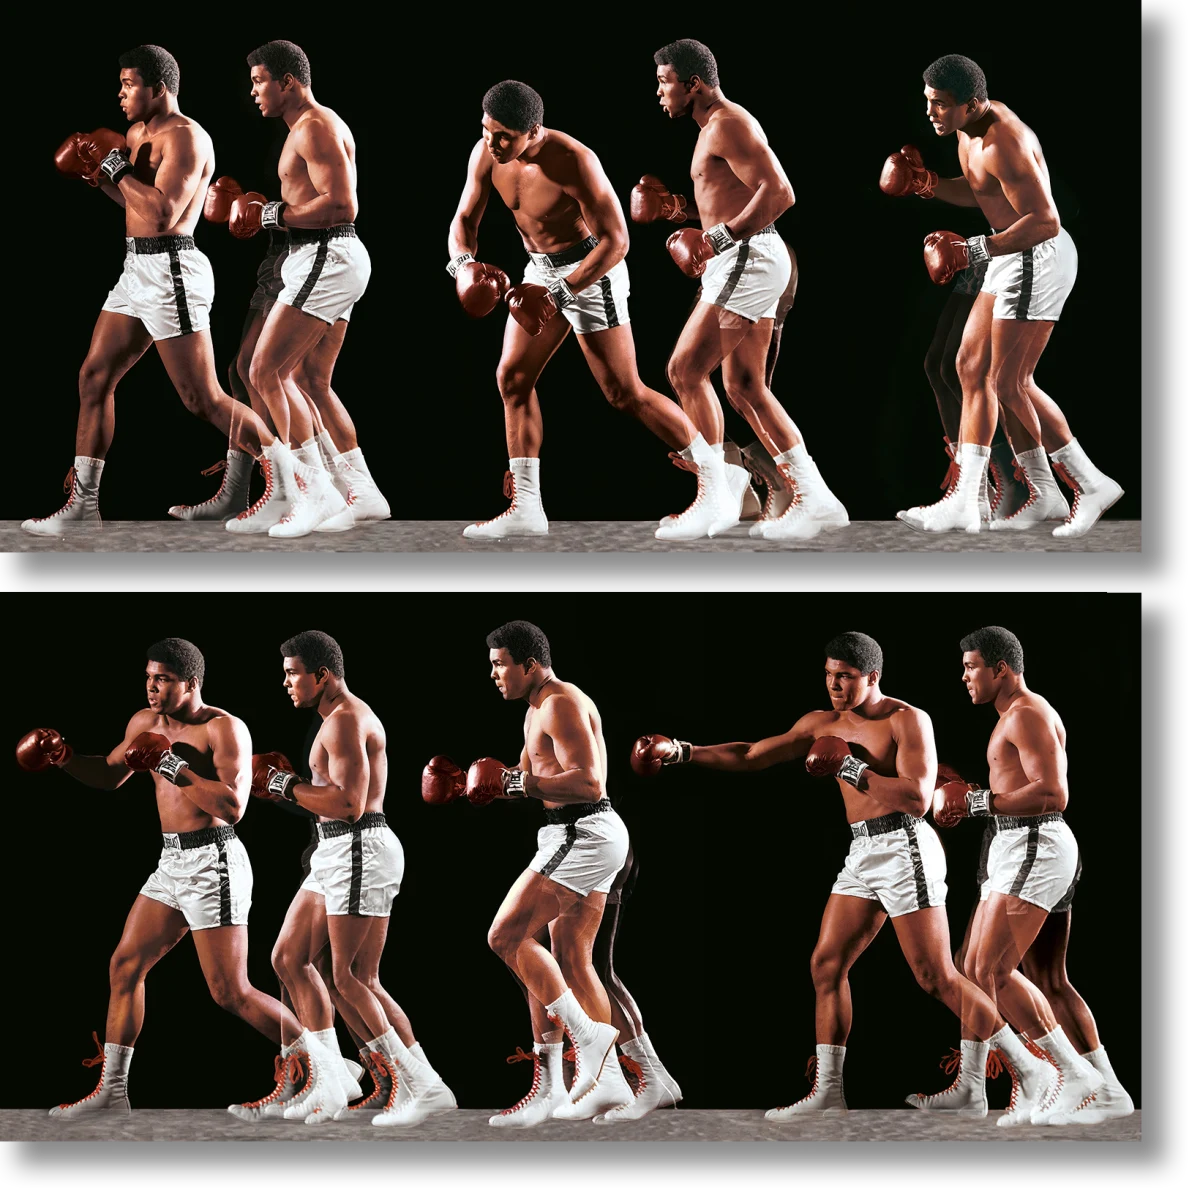 Neil Leifer. Homage to Ali. ‘Ali Invents the Double-Clutch Shuffle, 1966’